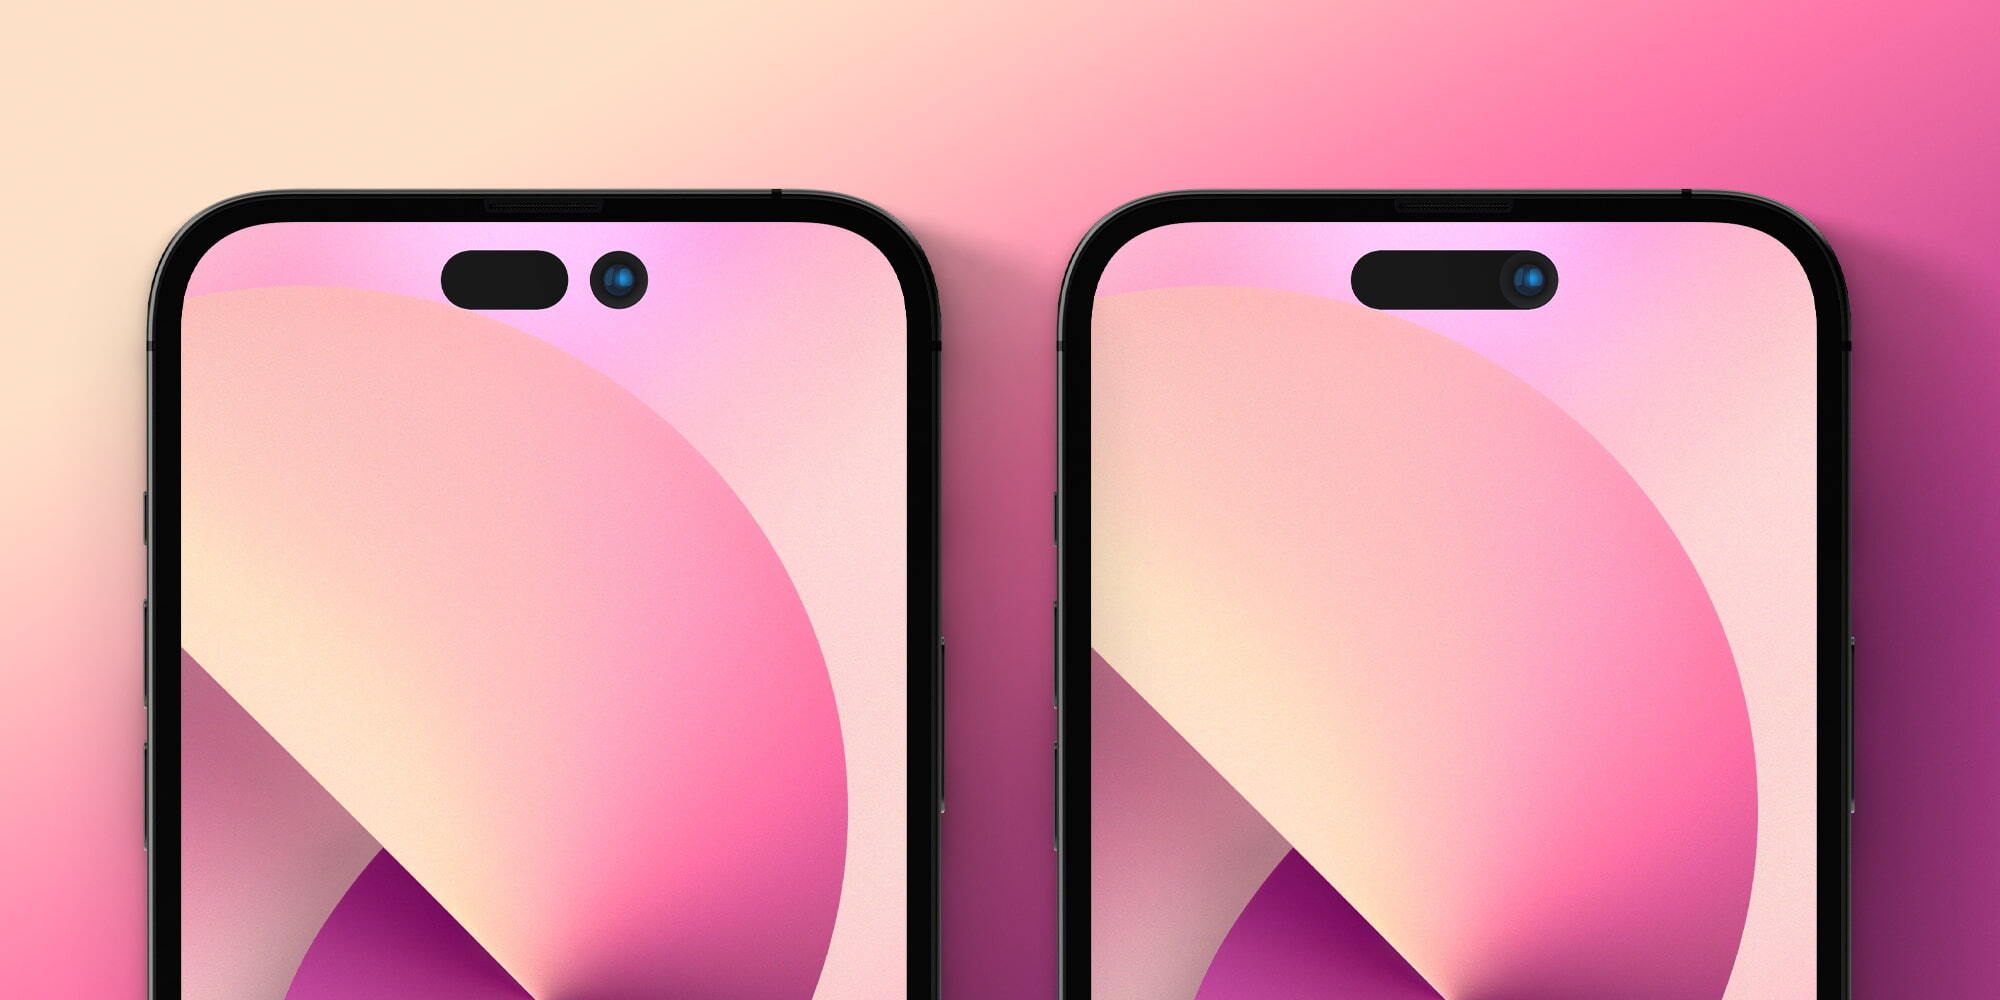 Notch Apple iPhone 11 Stock 5 Free Wallpaper download  Download Free Notch  Apple iPhone 11 Stock 5 HD Wallpapers to your mobile phone or tablet